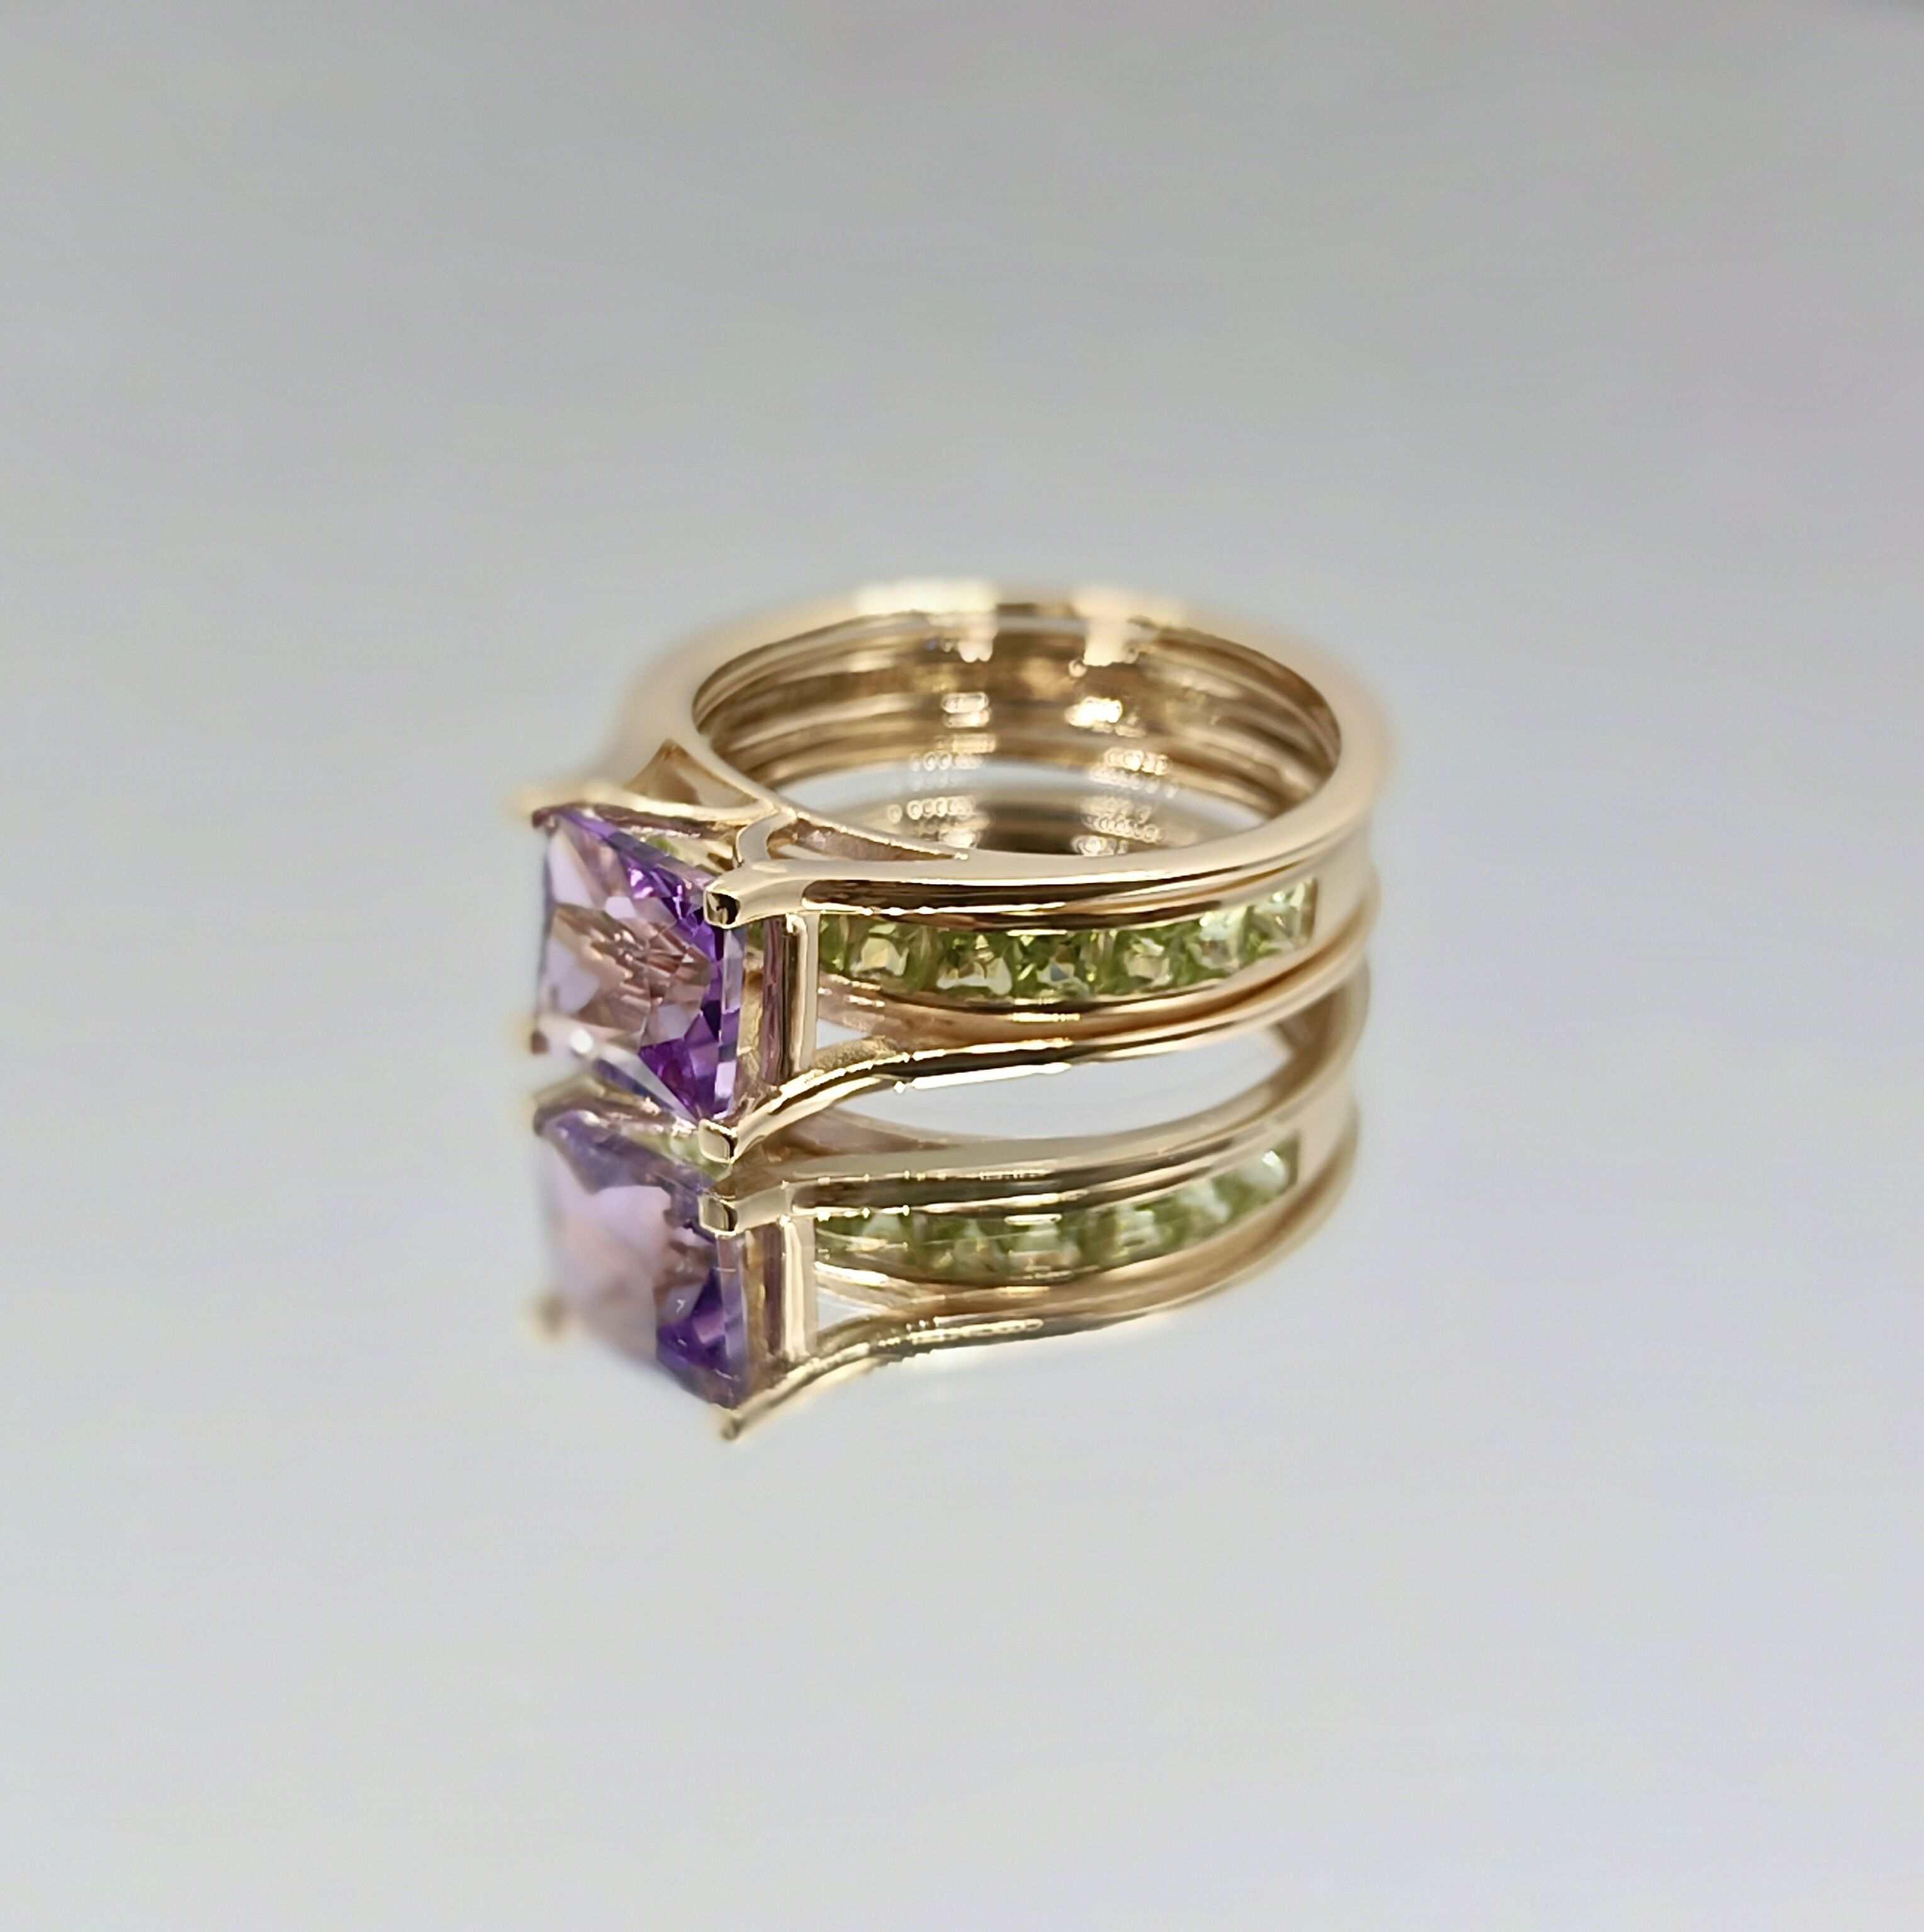 14K Solid Gold Gemstones Rings Customization Wedding Ring Set with Peridot and Amethyst-5